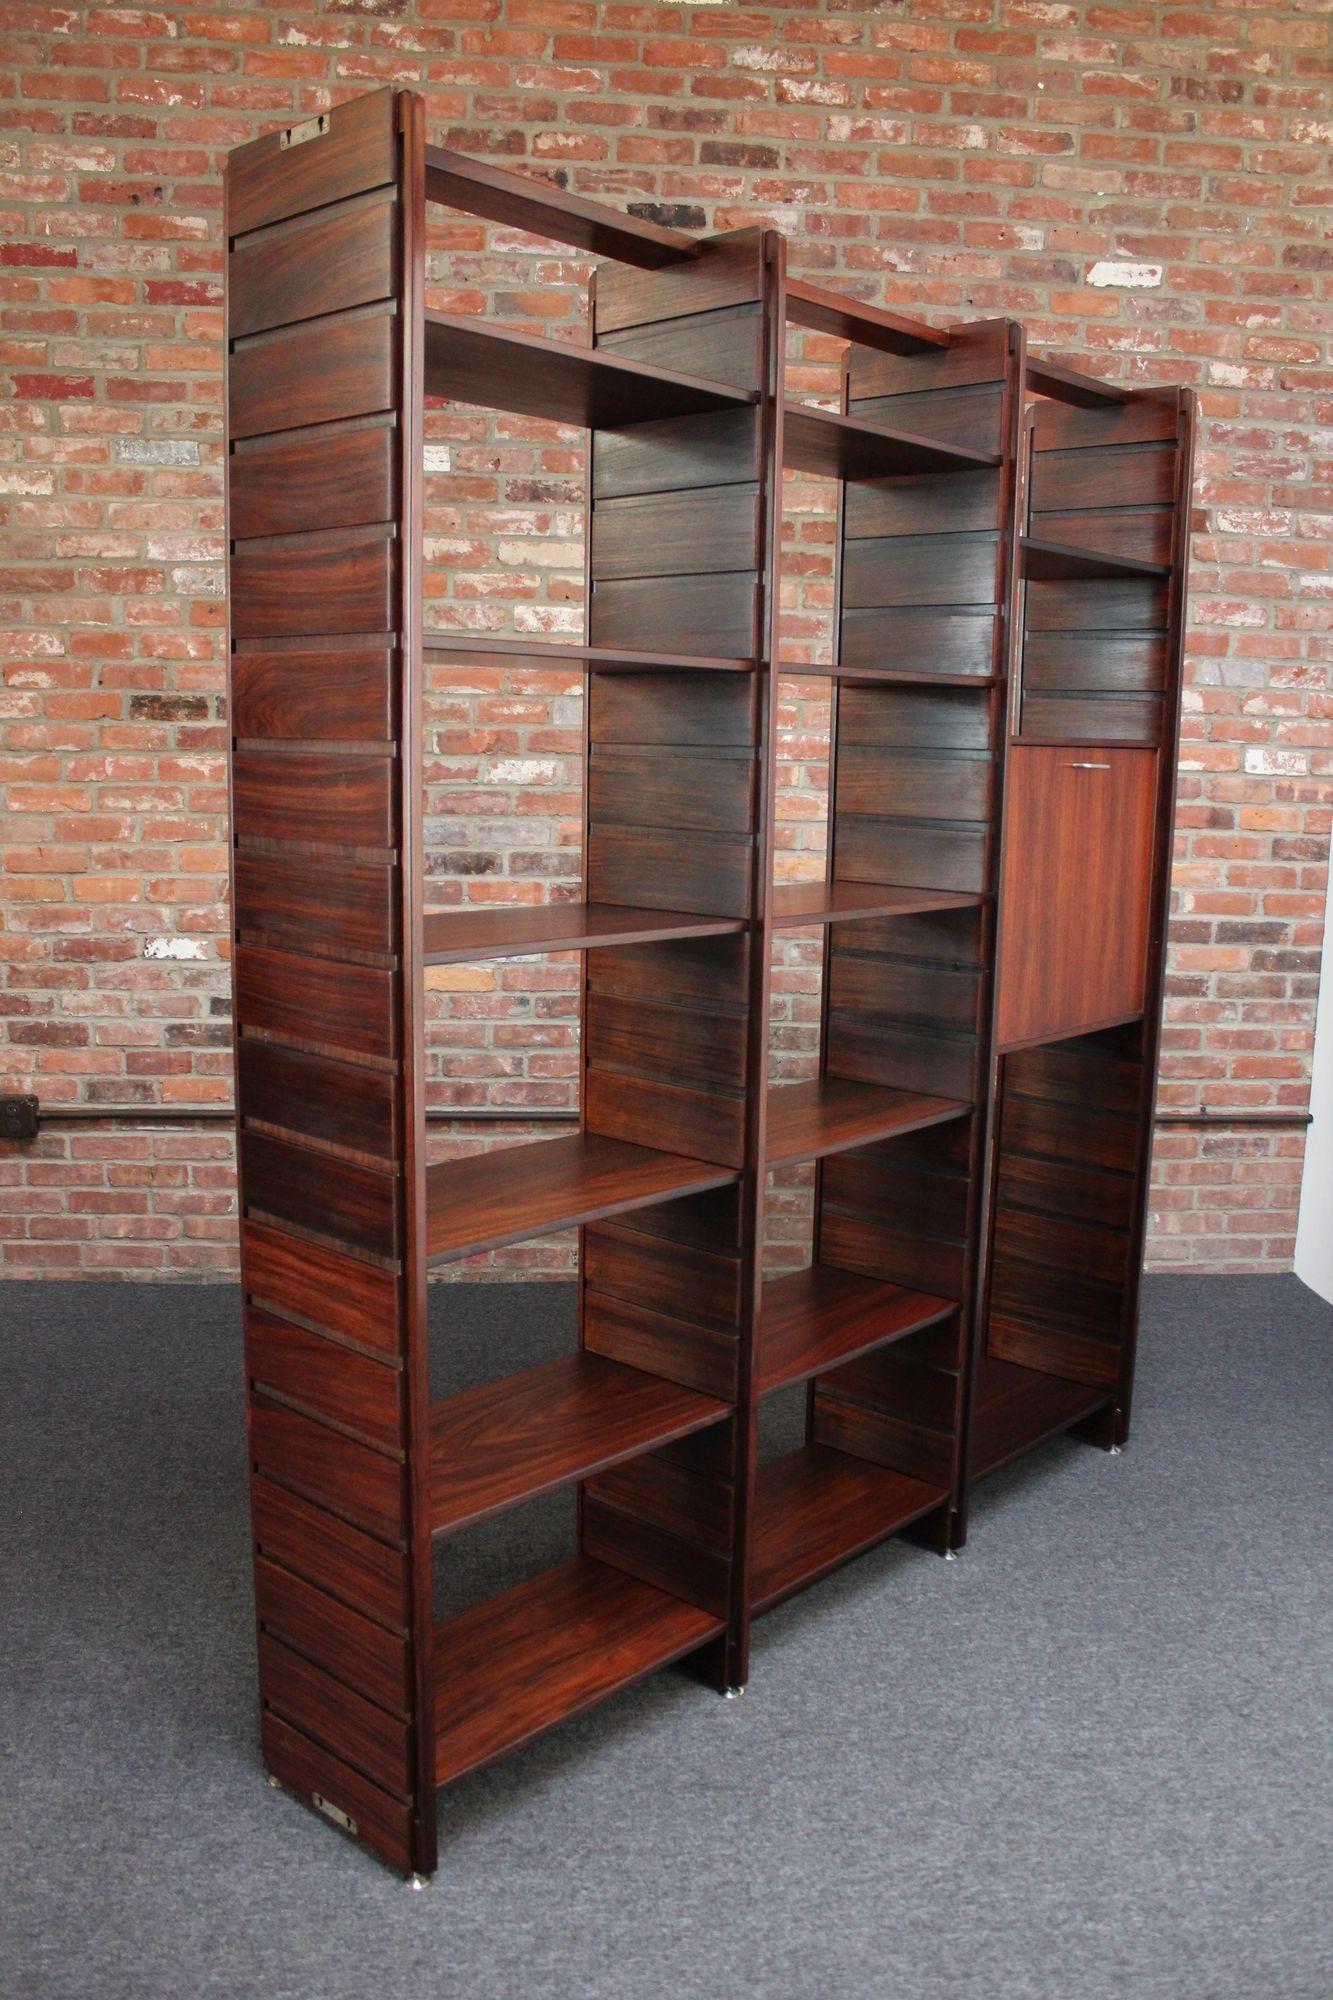 Italian Modern Rosewood Wall Unit/Bookcase by Gianfranco Frattini for Bernini In Good Condition For Sale In Brooklyn, NY